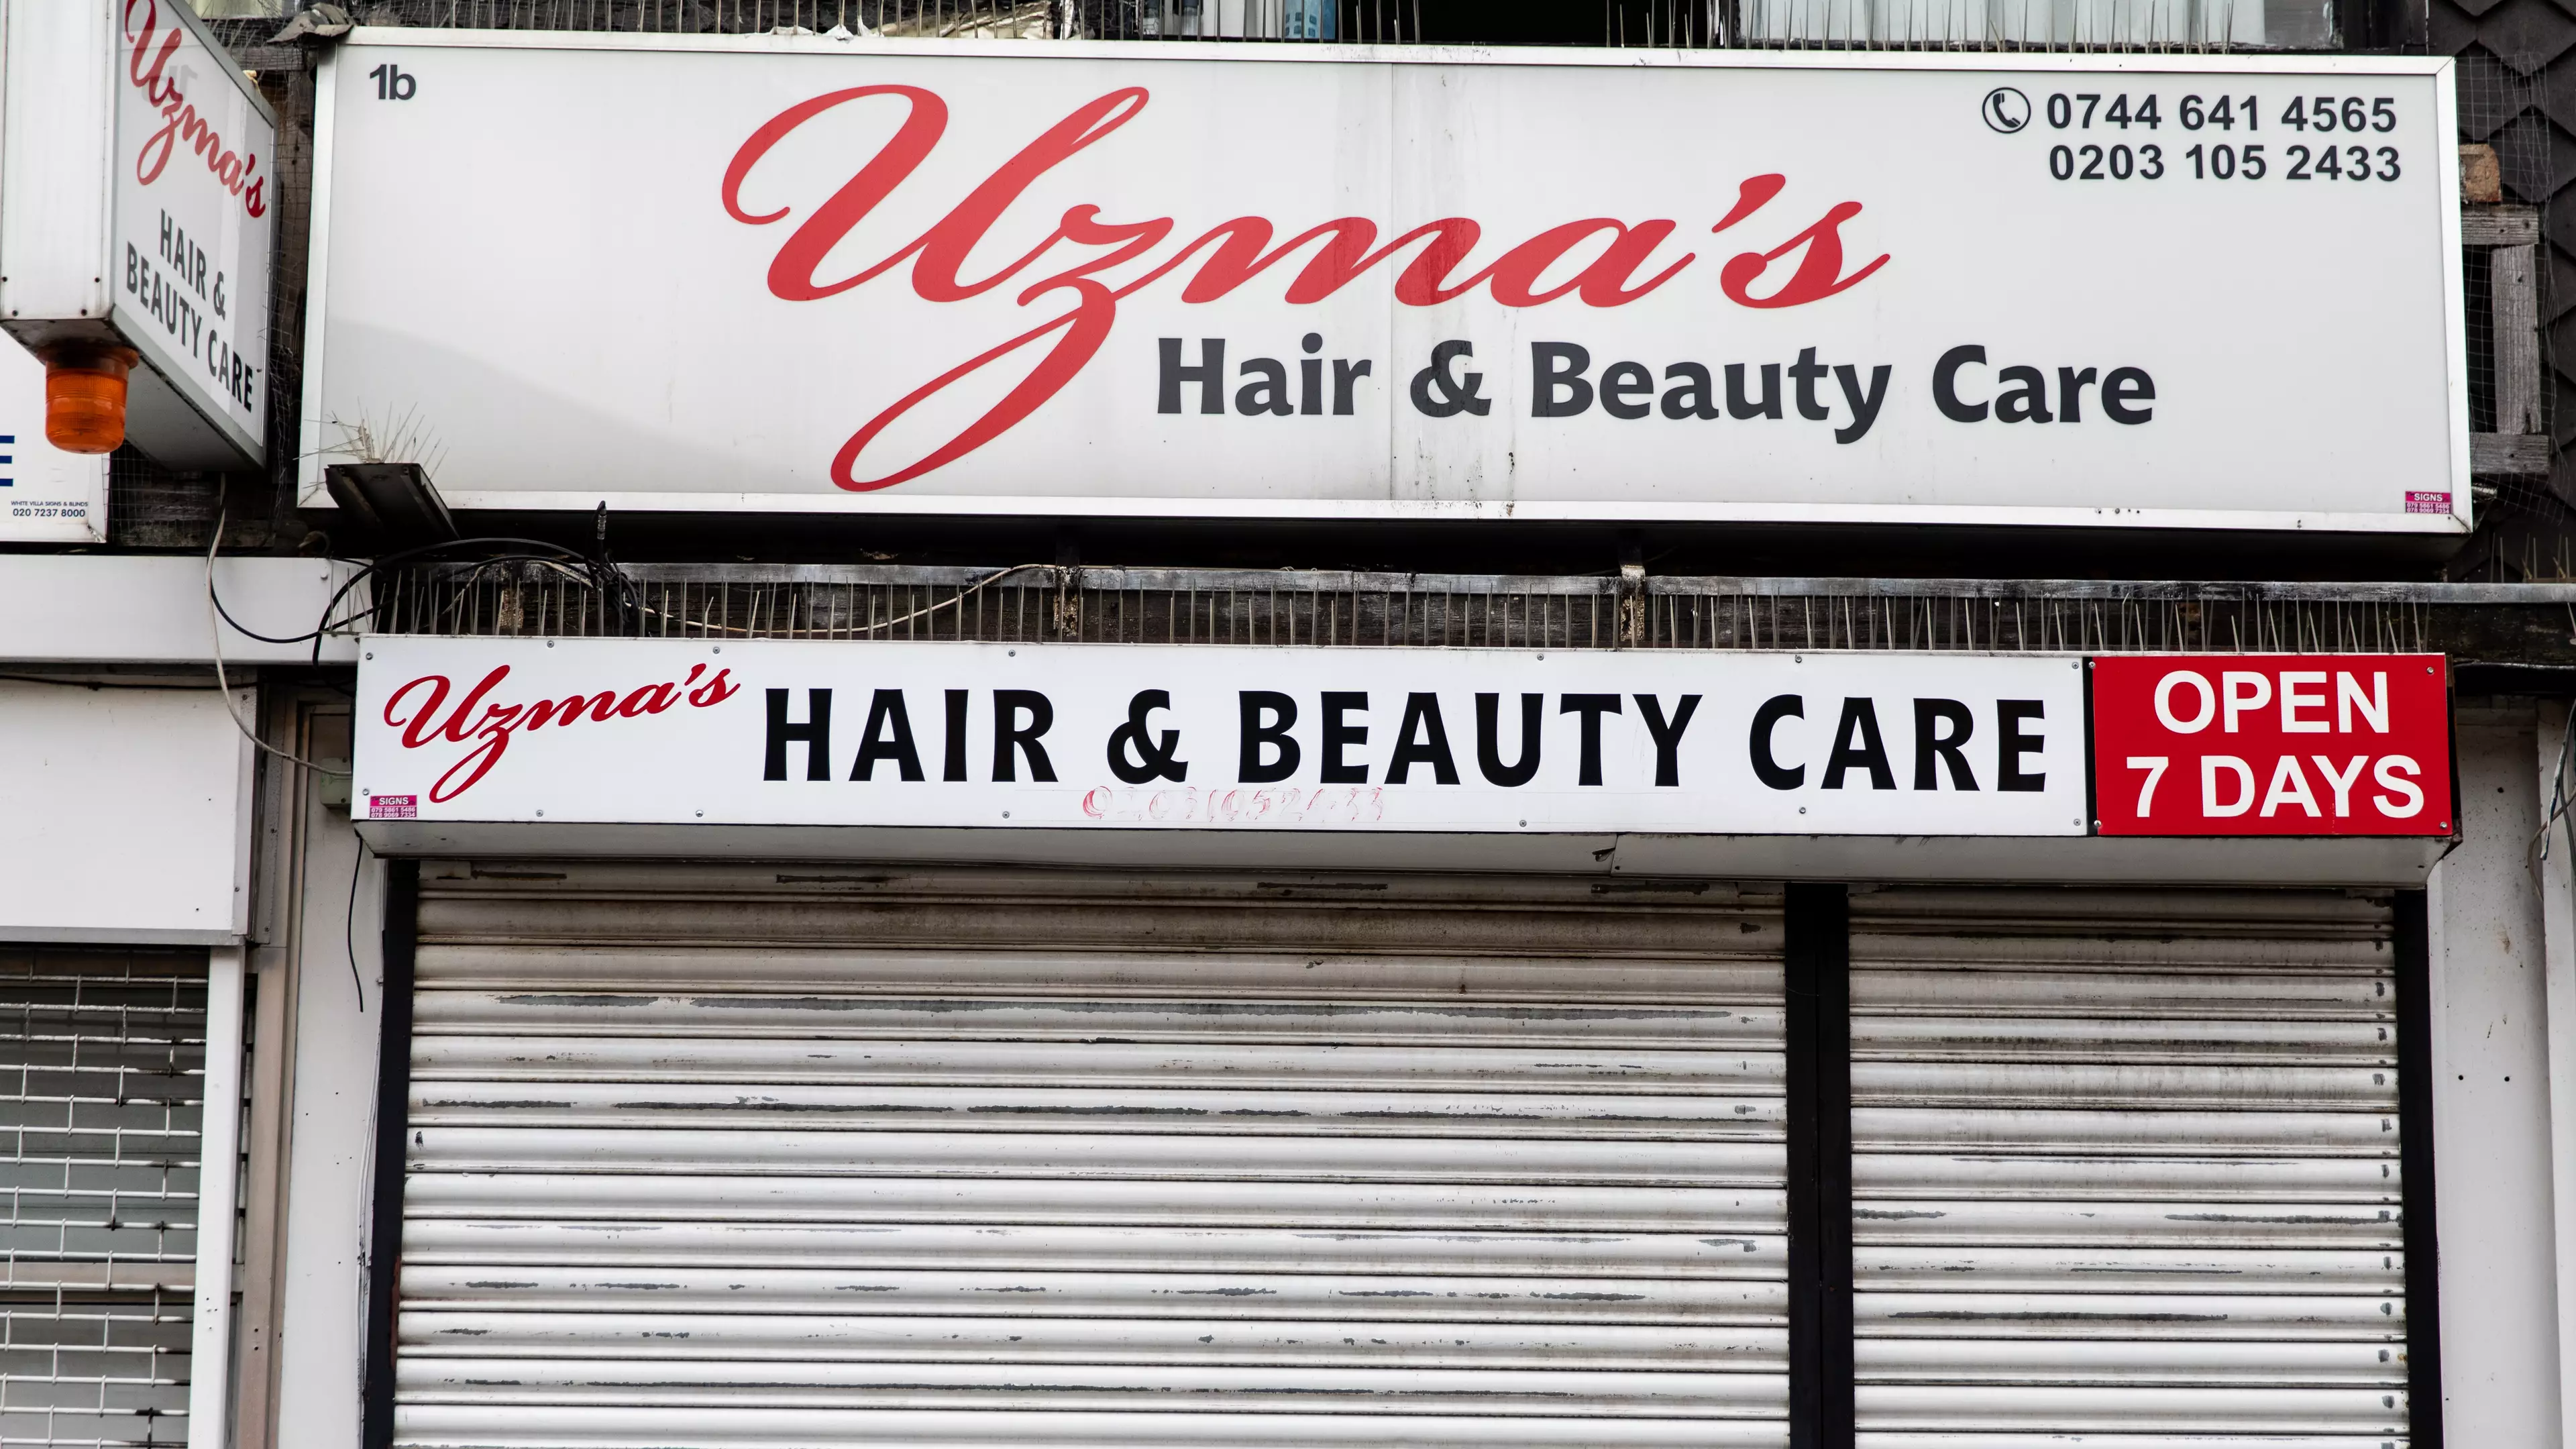 Hairdresser Has Already Taken 2,000 Bookings After Being Allowed To Reopen